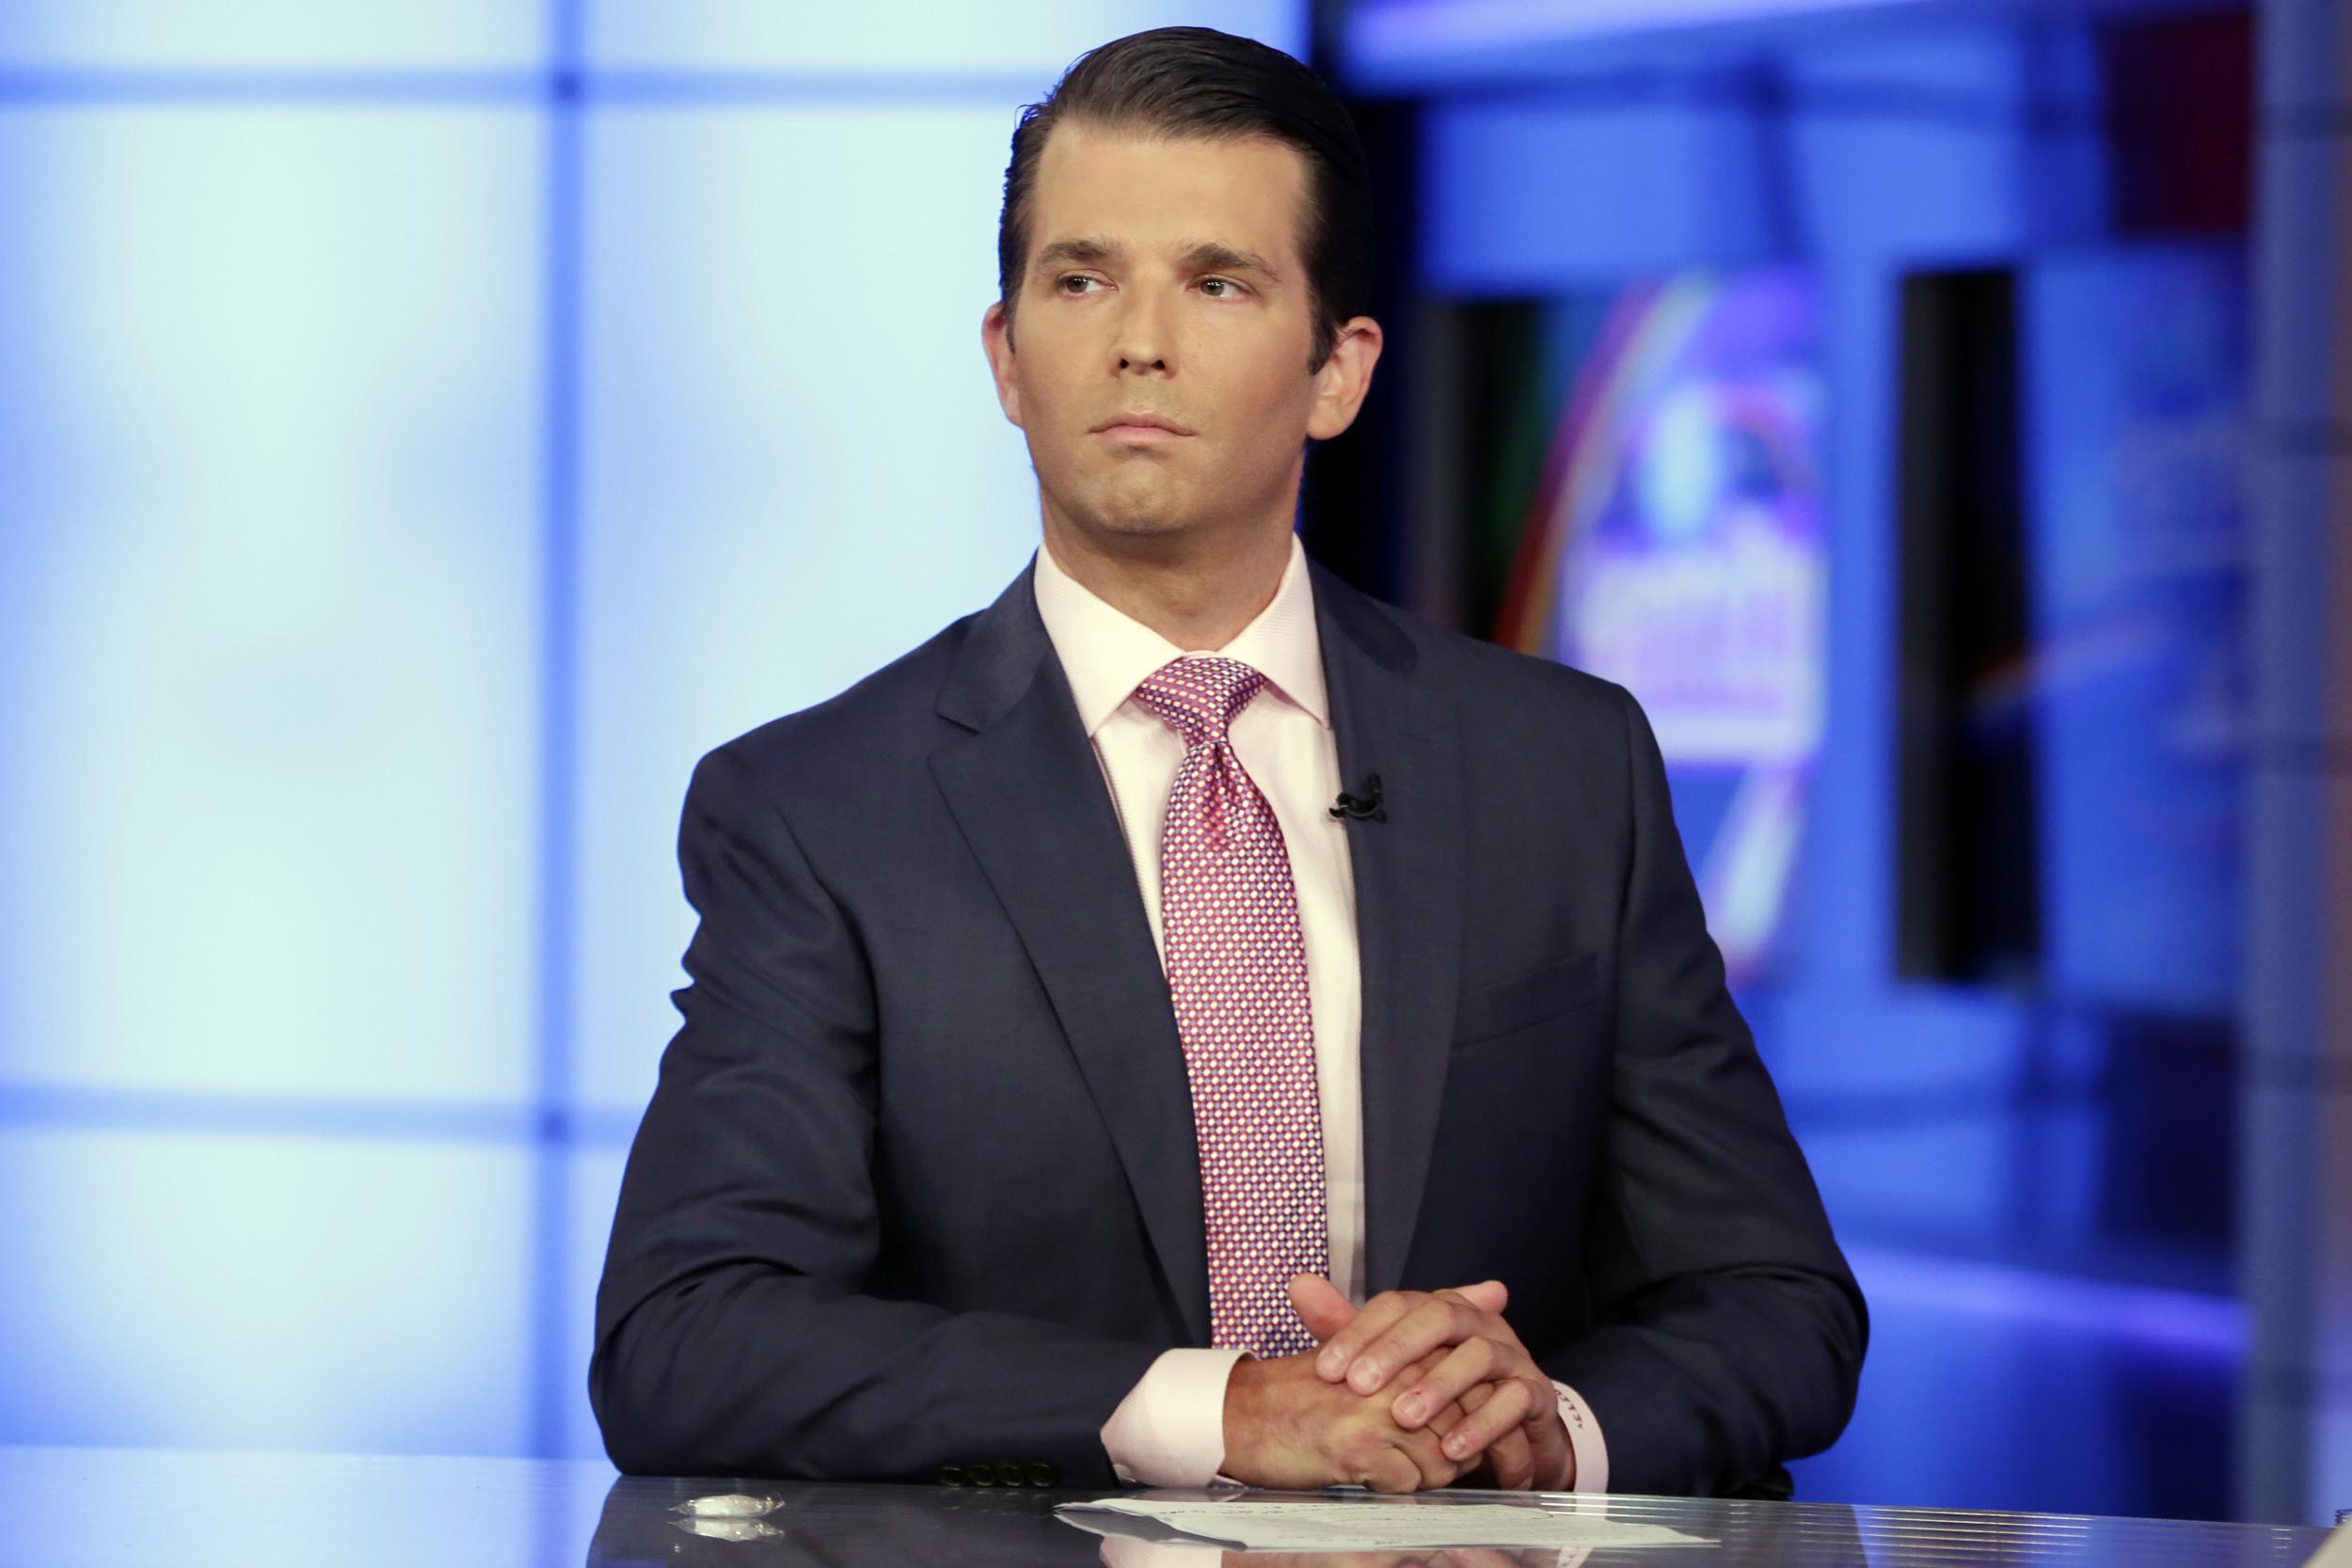 Critics have mocked Trump Jnr for the gaffe and claimed the mistake was indicative of a lack of intelligence